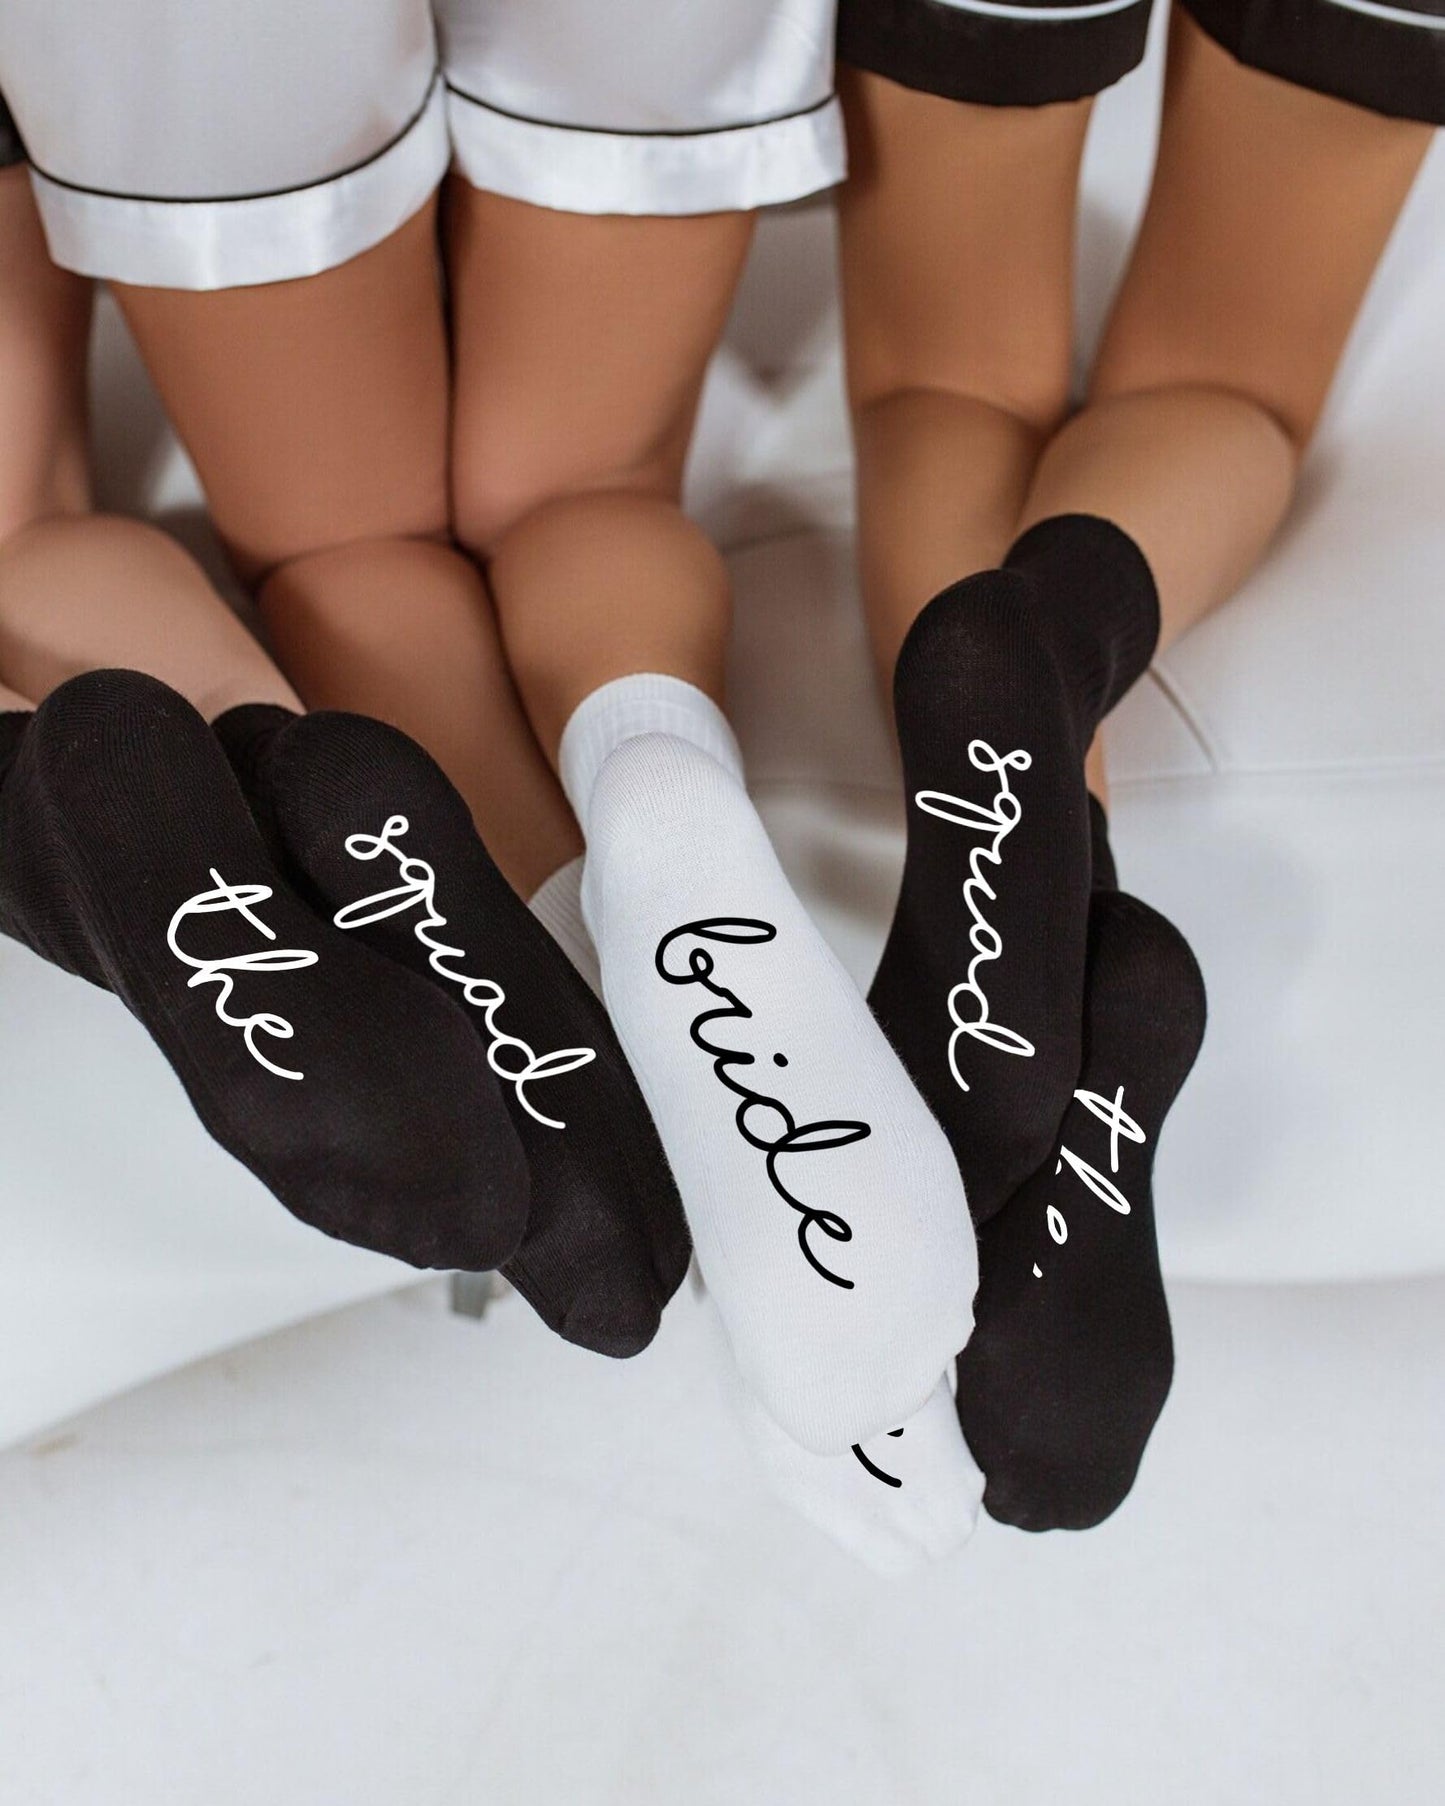 Bridal Socks Bachelorette Party Favors by Funky Junque